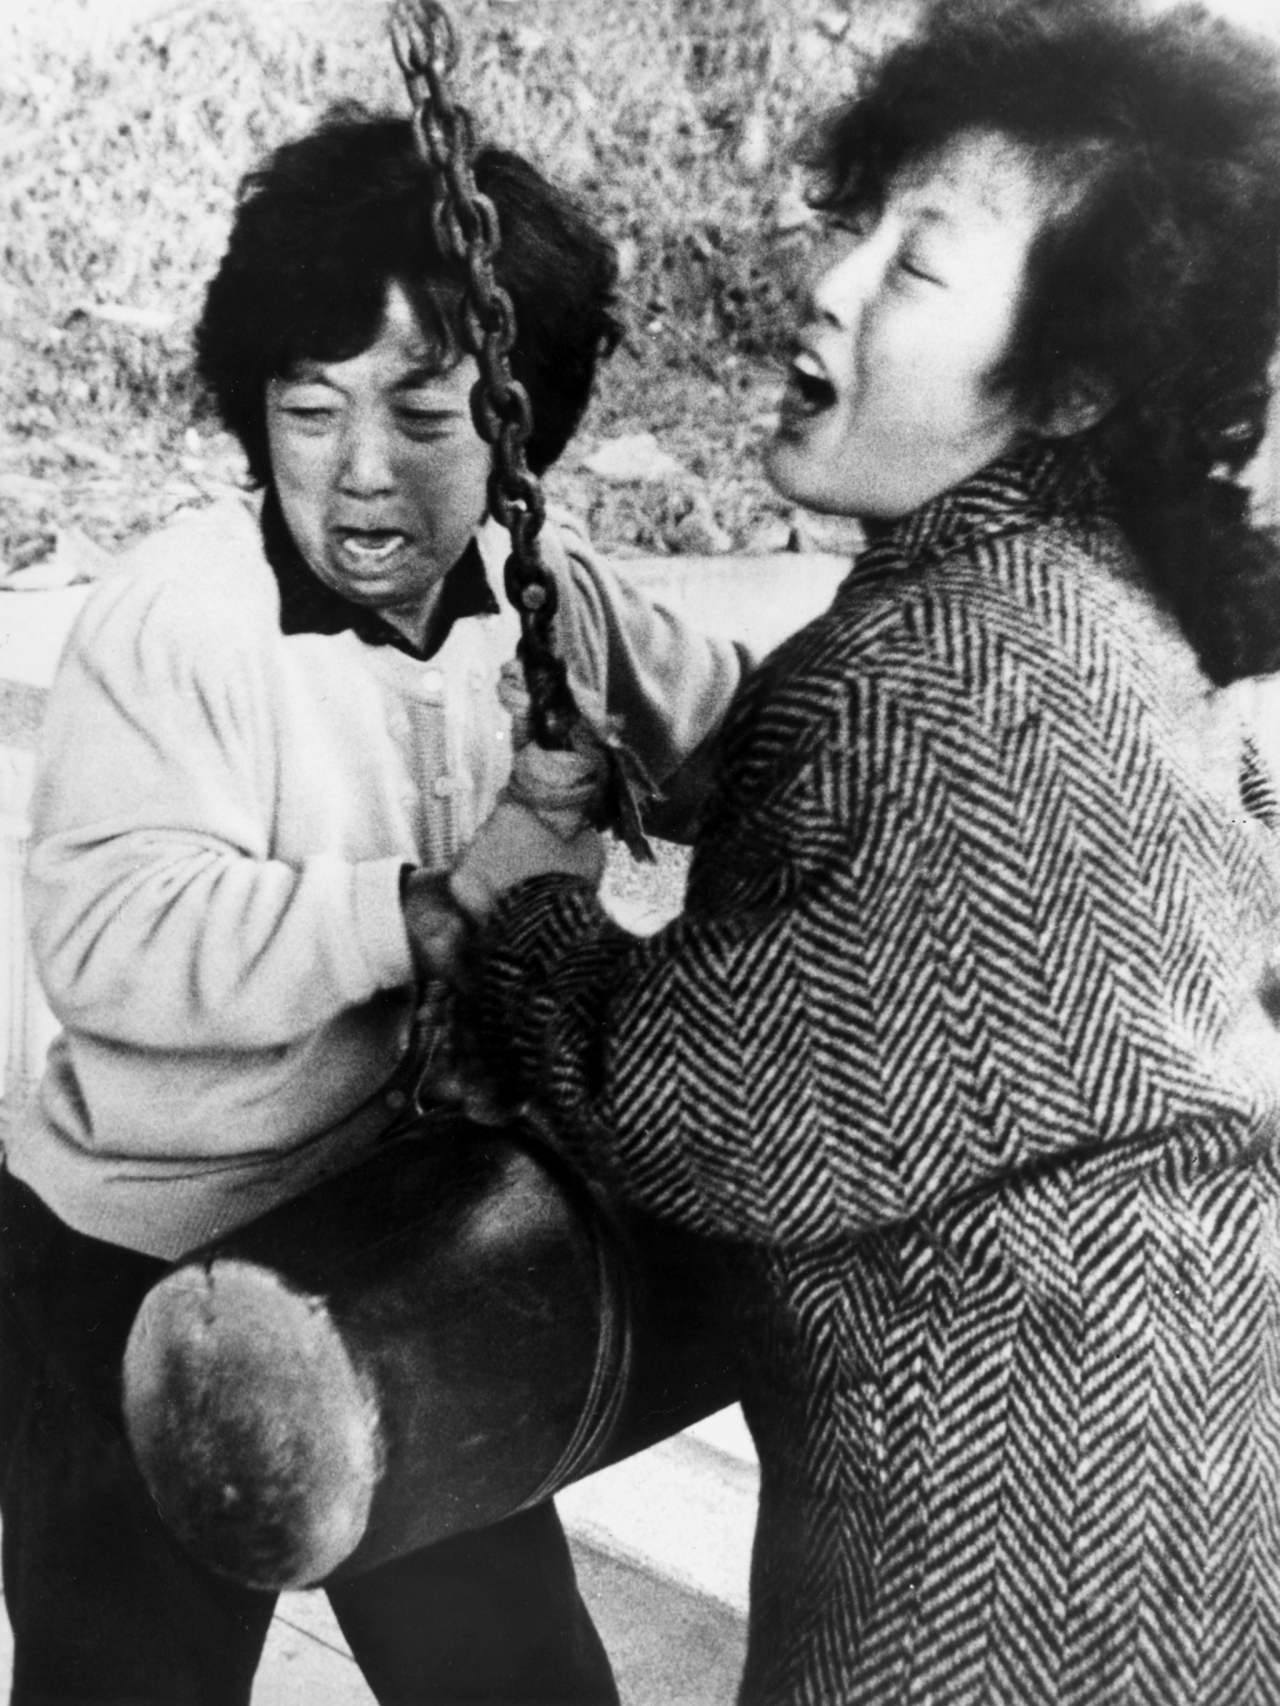 This photo from Feb. 7, 1987, shows Jeong Cha-sun (right), as she rings a bell and cries over the death of her youngest son Park Jong-chul, at a Buddhist event in Busan, along with her daughter Eun-suk. (Yonhap)